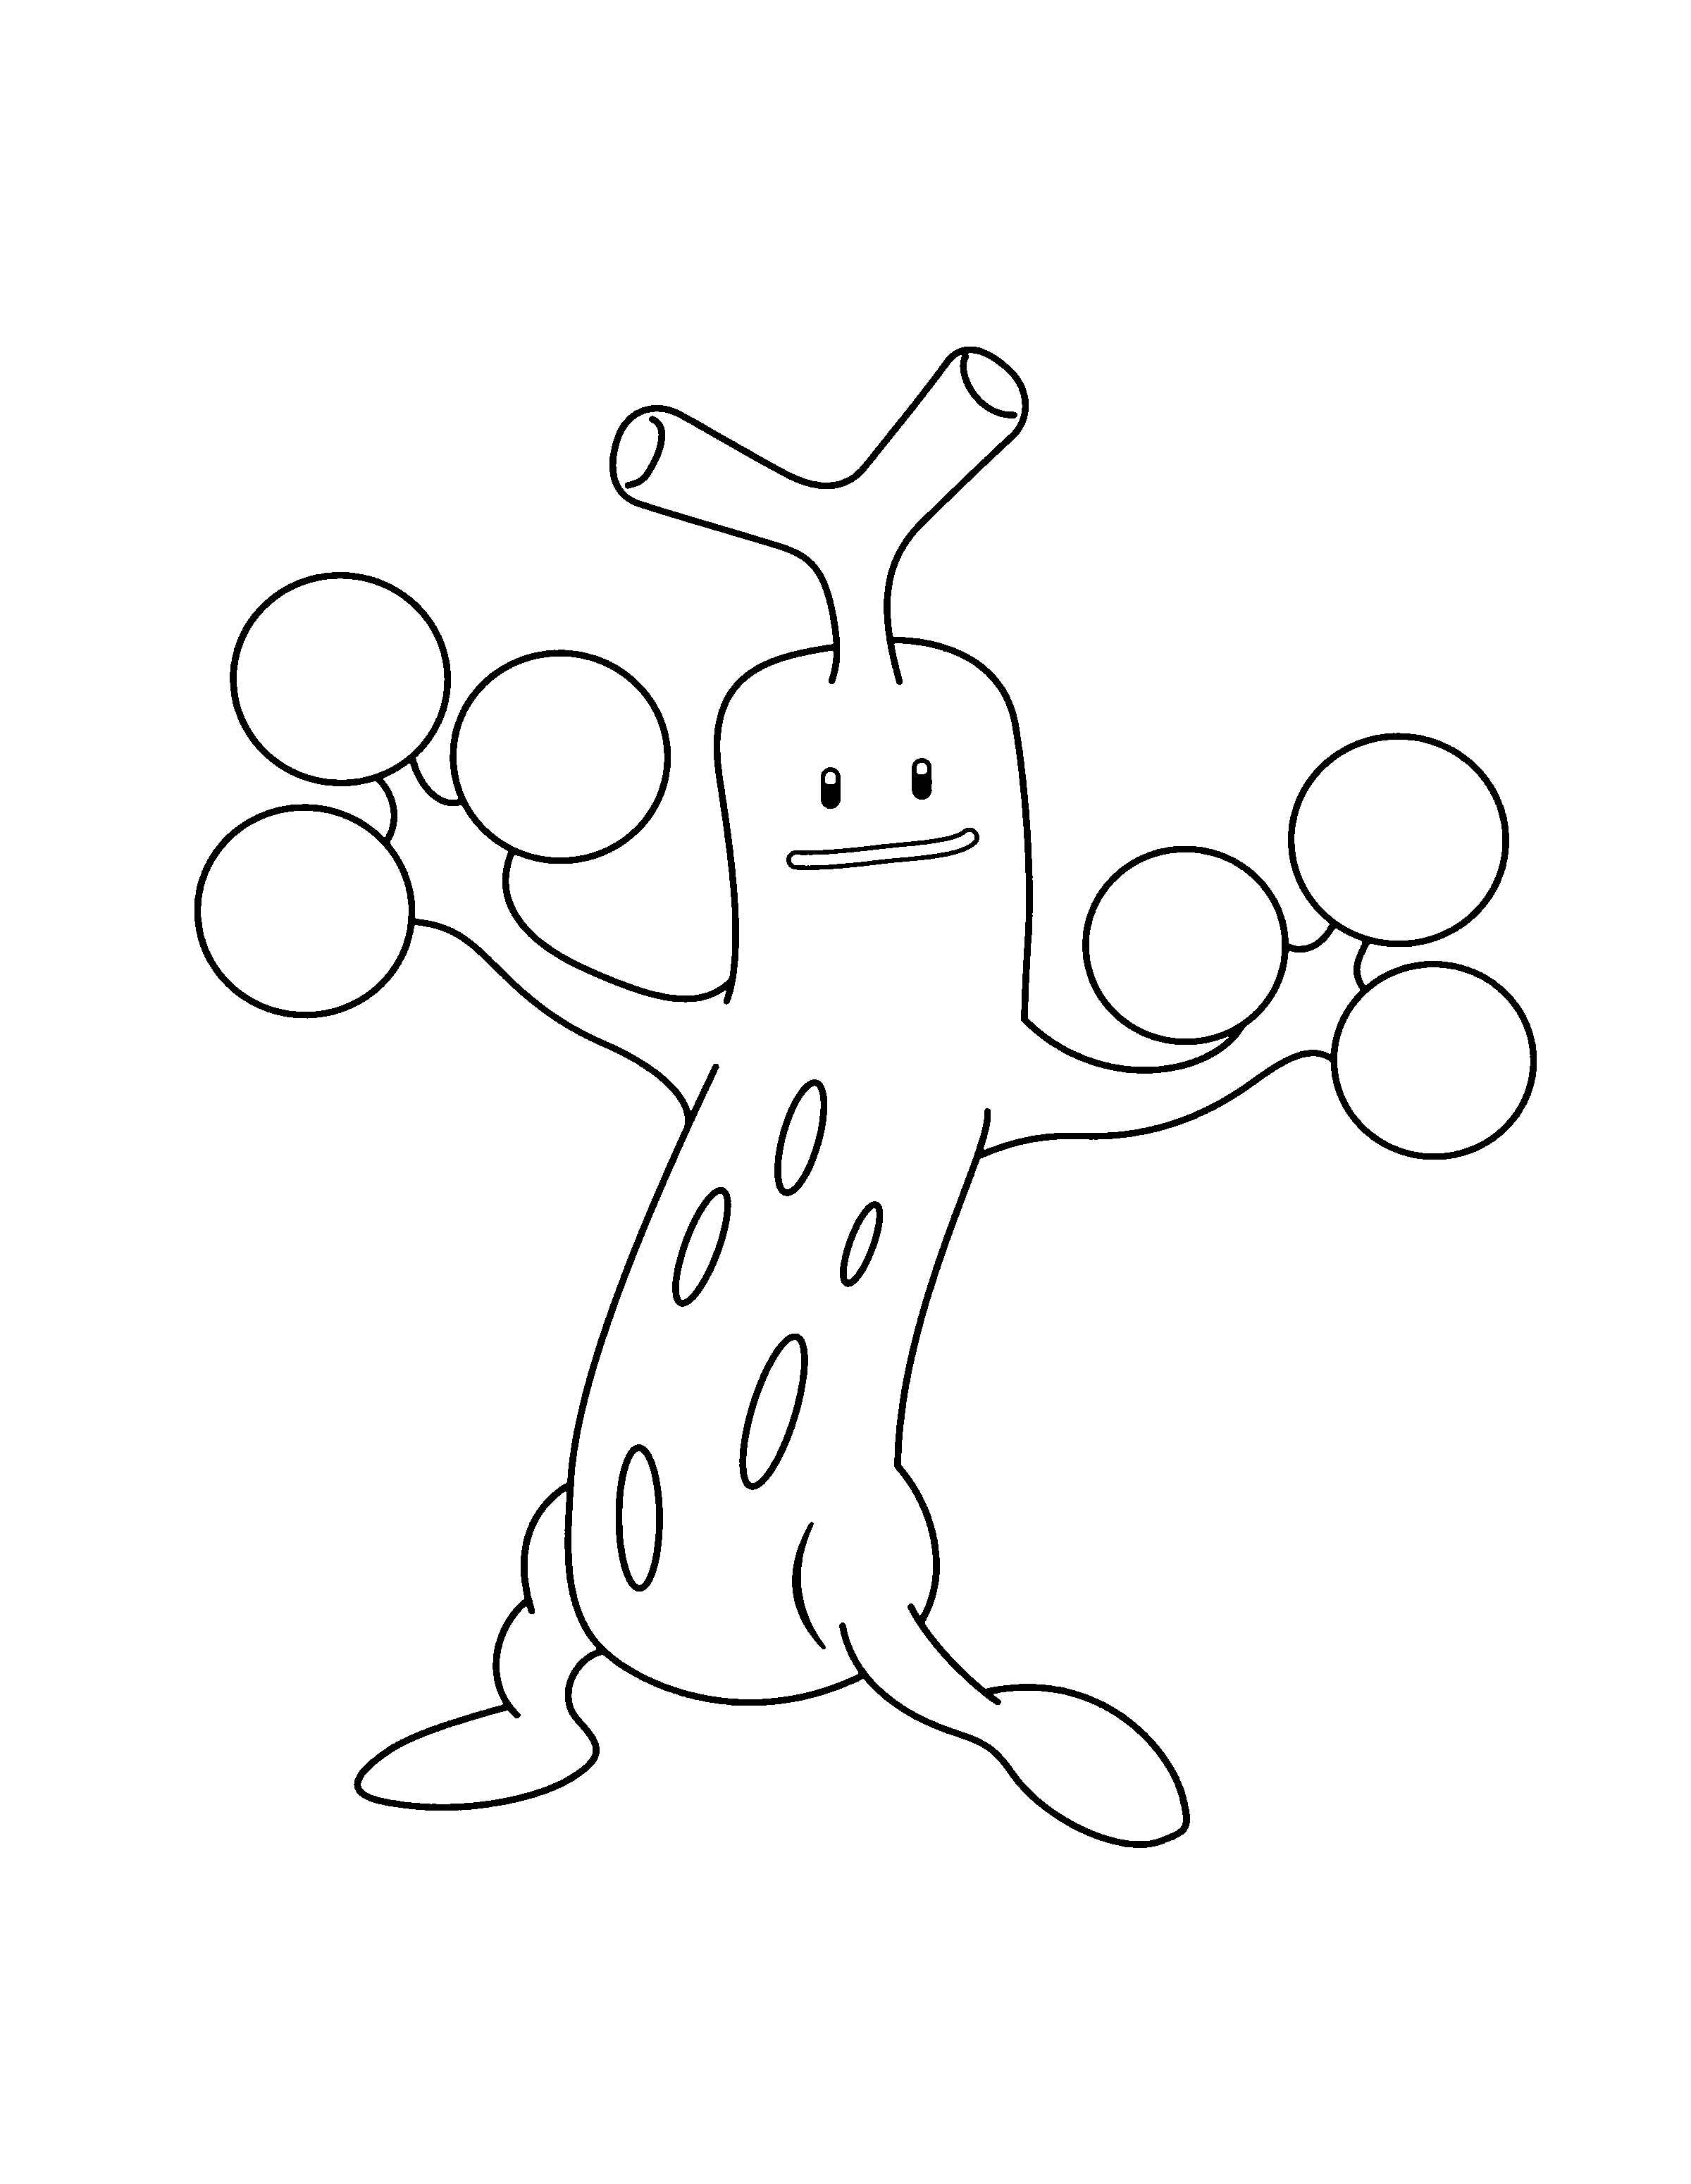 animated-coloring-pages-pokemon-image-0201